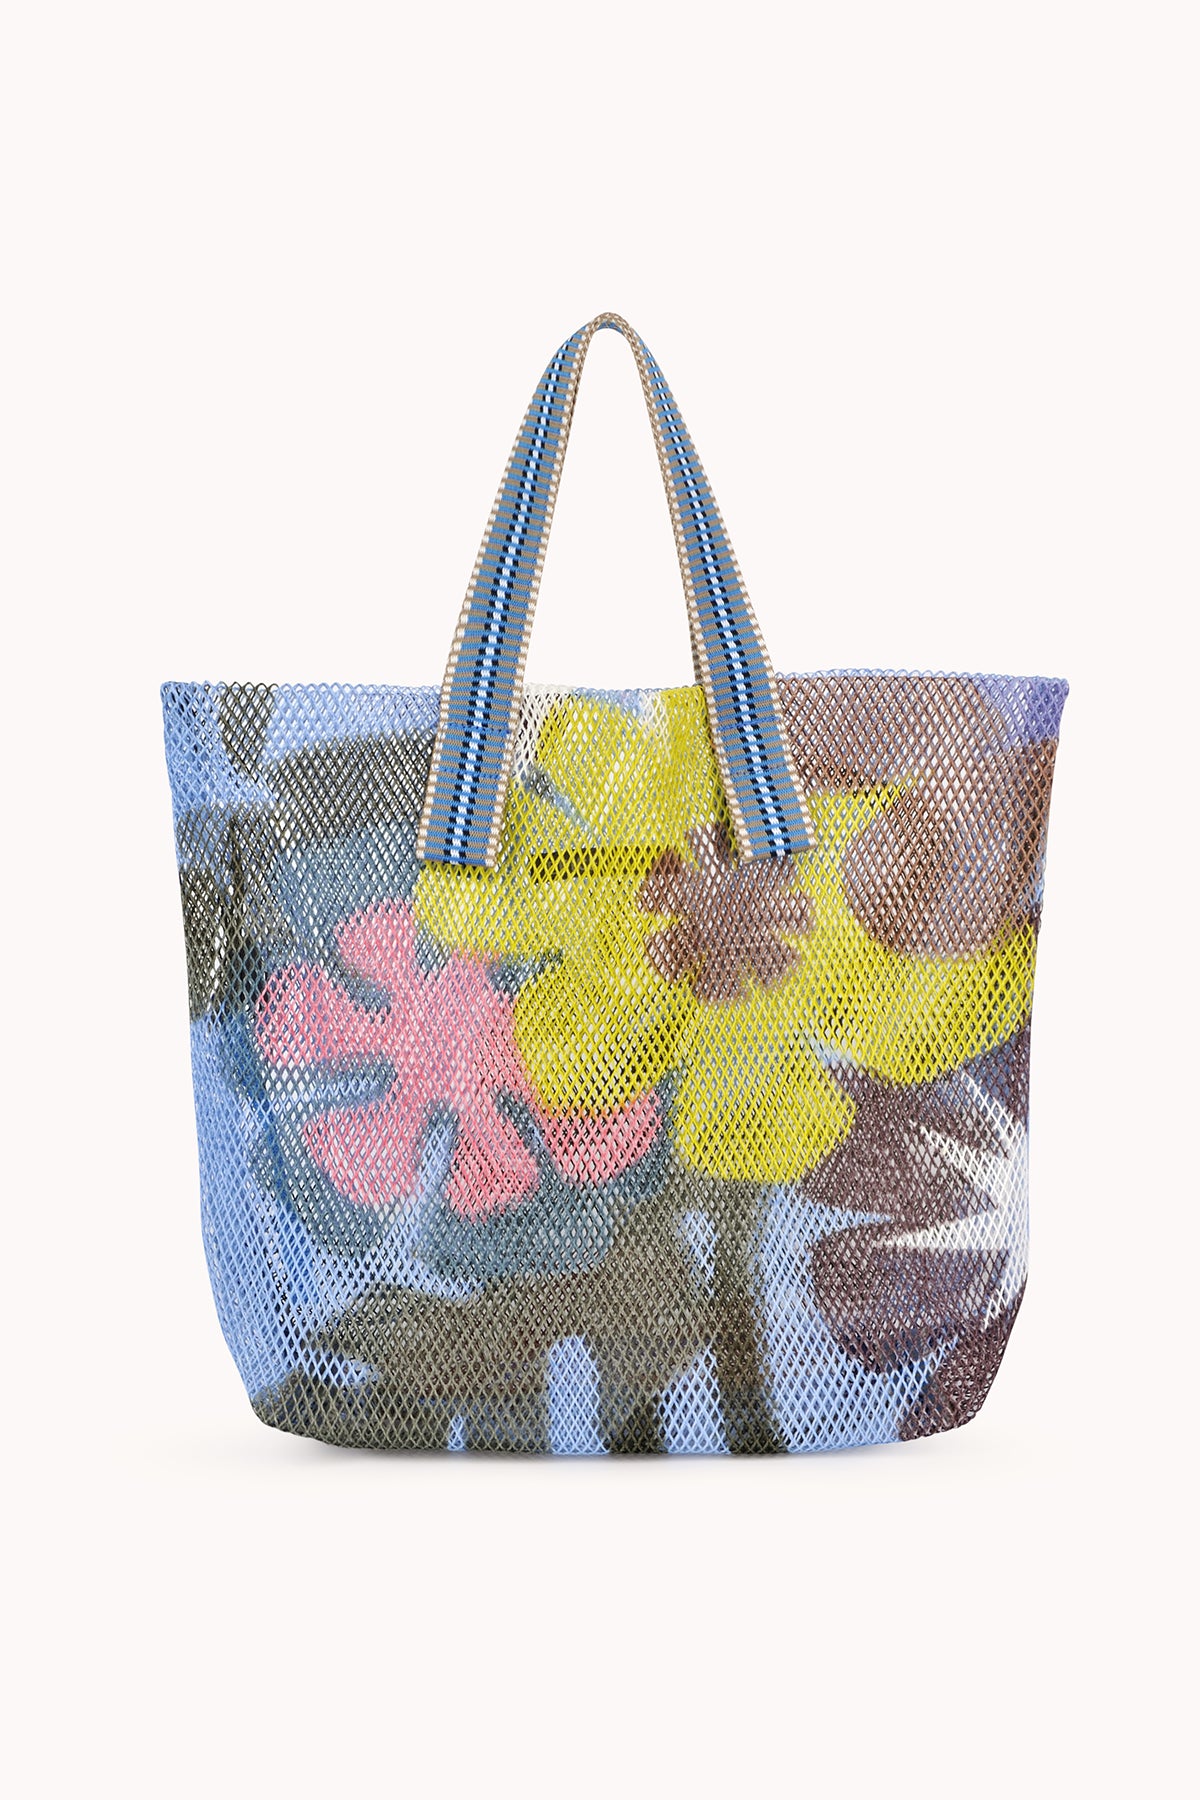   Small mesh tote in blue with multi colored flowers. 